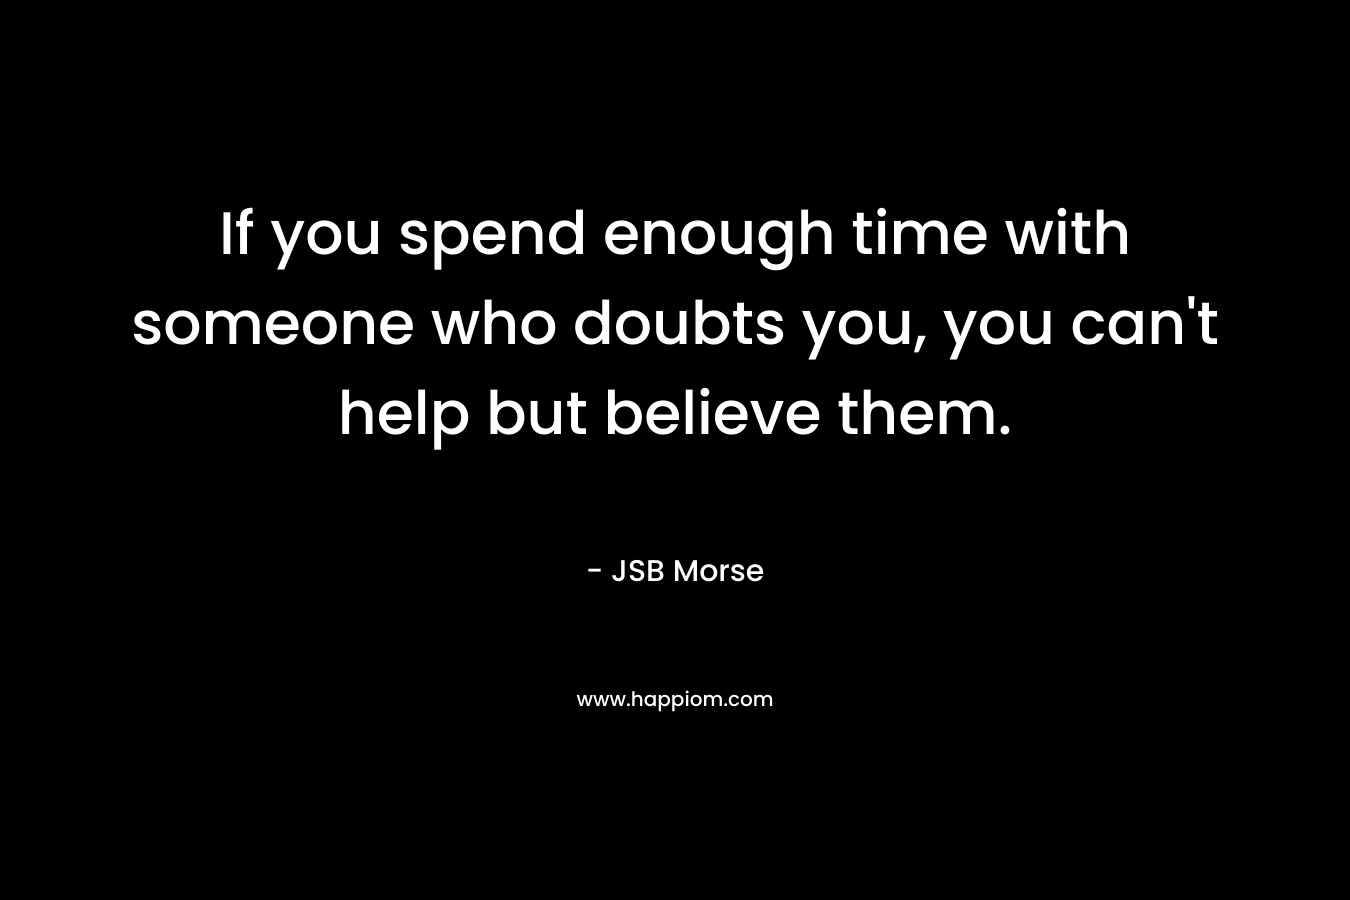 If you spend enough time with someone who doubts you, you can’t help but believe them. – JSB Morse